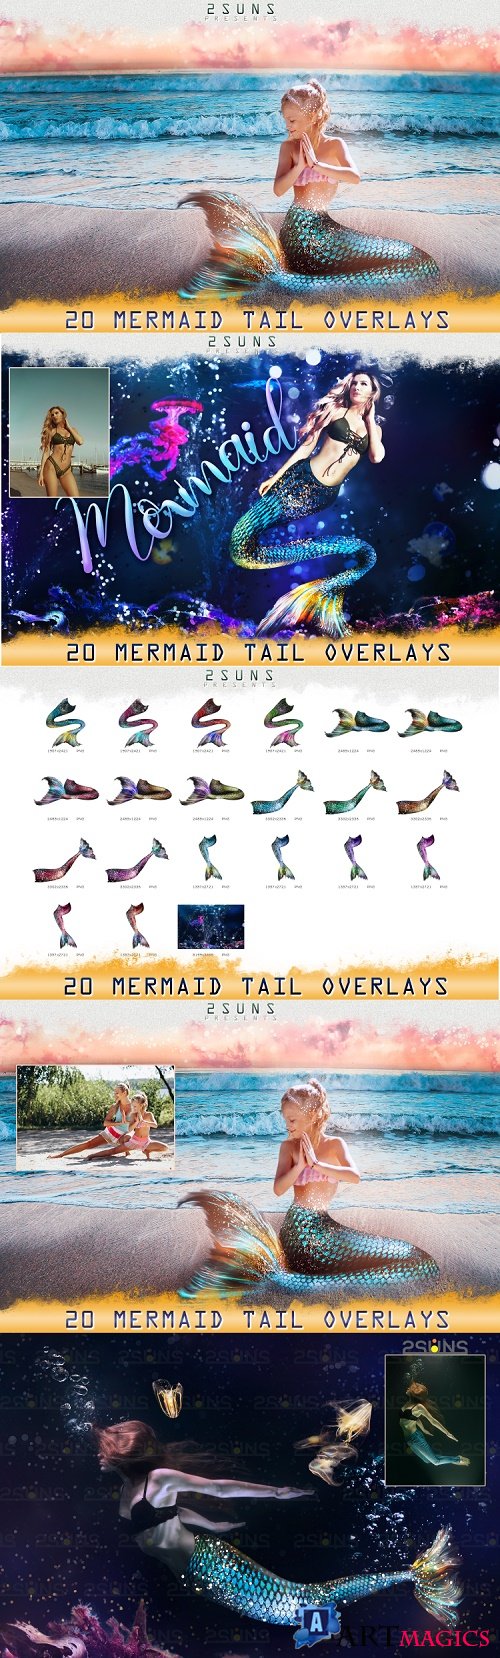 Mermaid tail, tails, overlays, Clipart, PNG - 312697